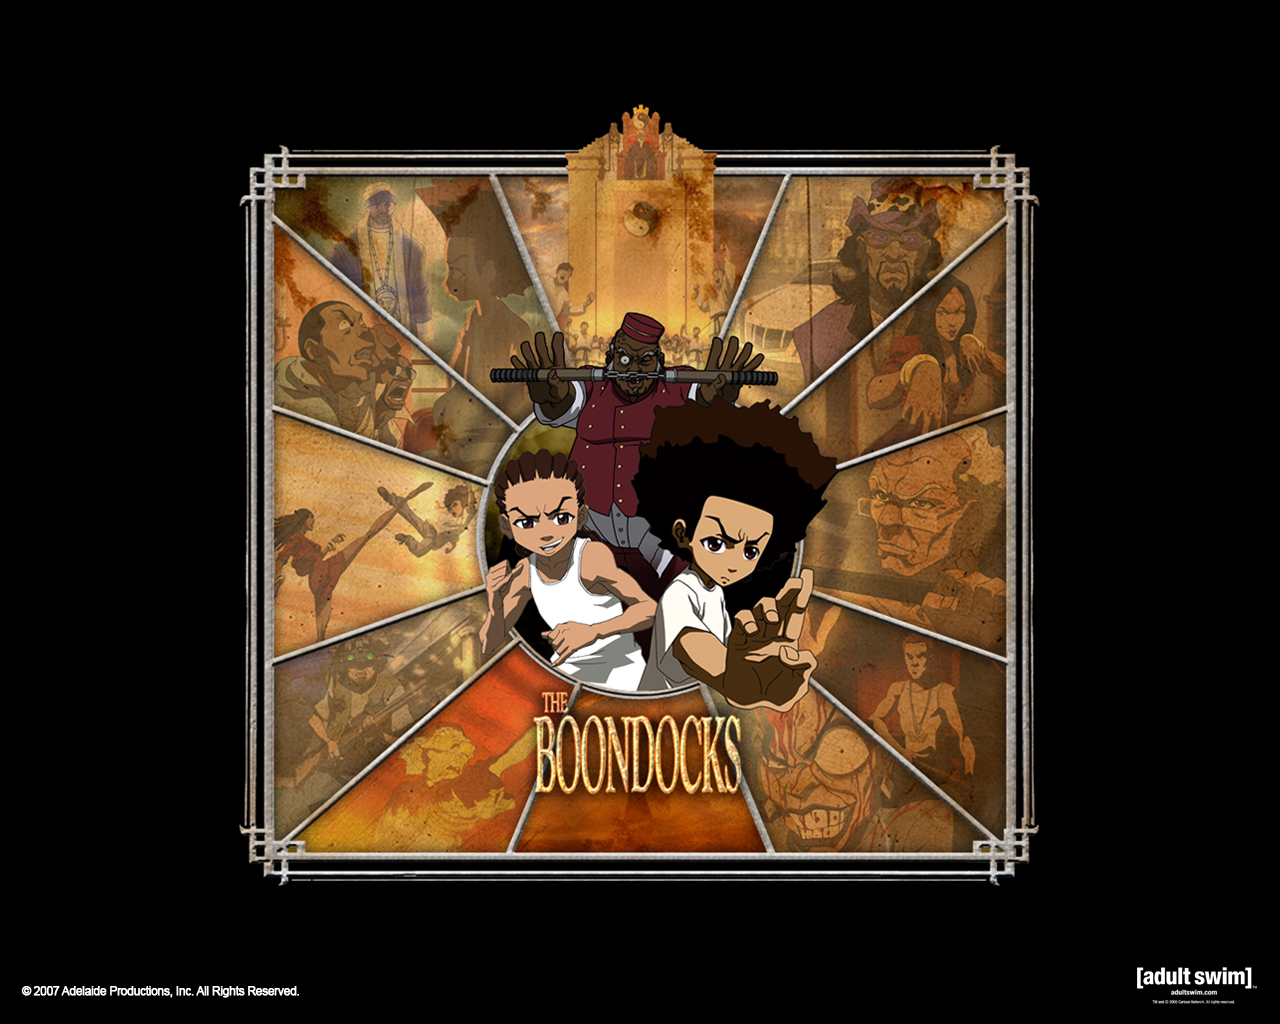 The Boondocks | Free Desktop Wallpapers for HD, Widescreen and Mobile